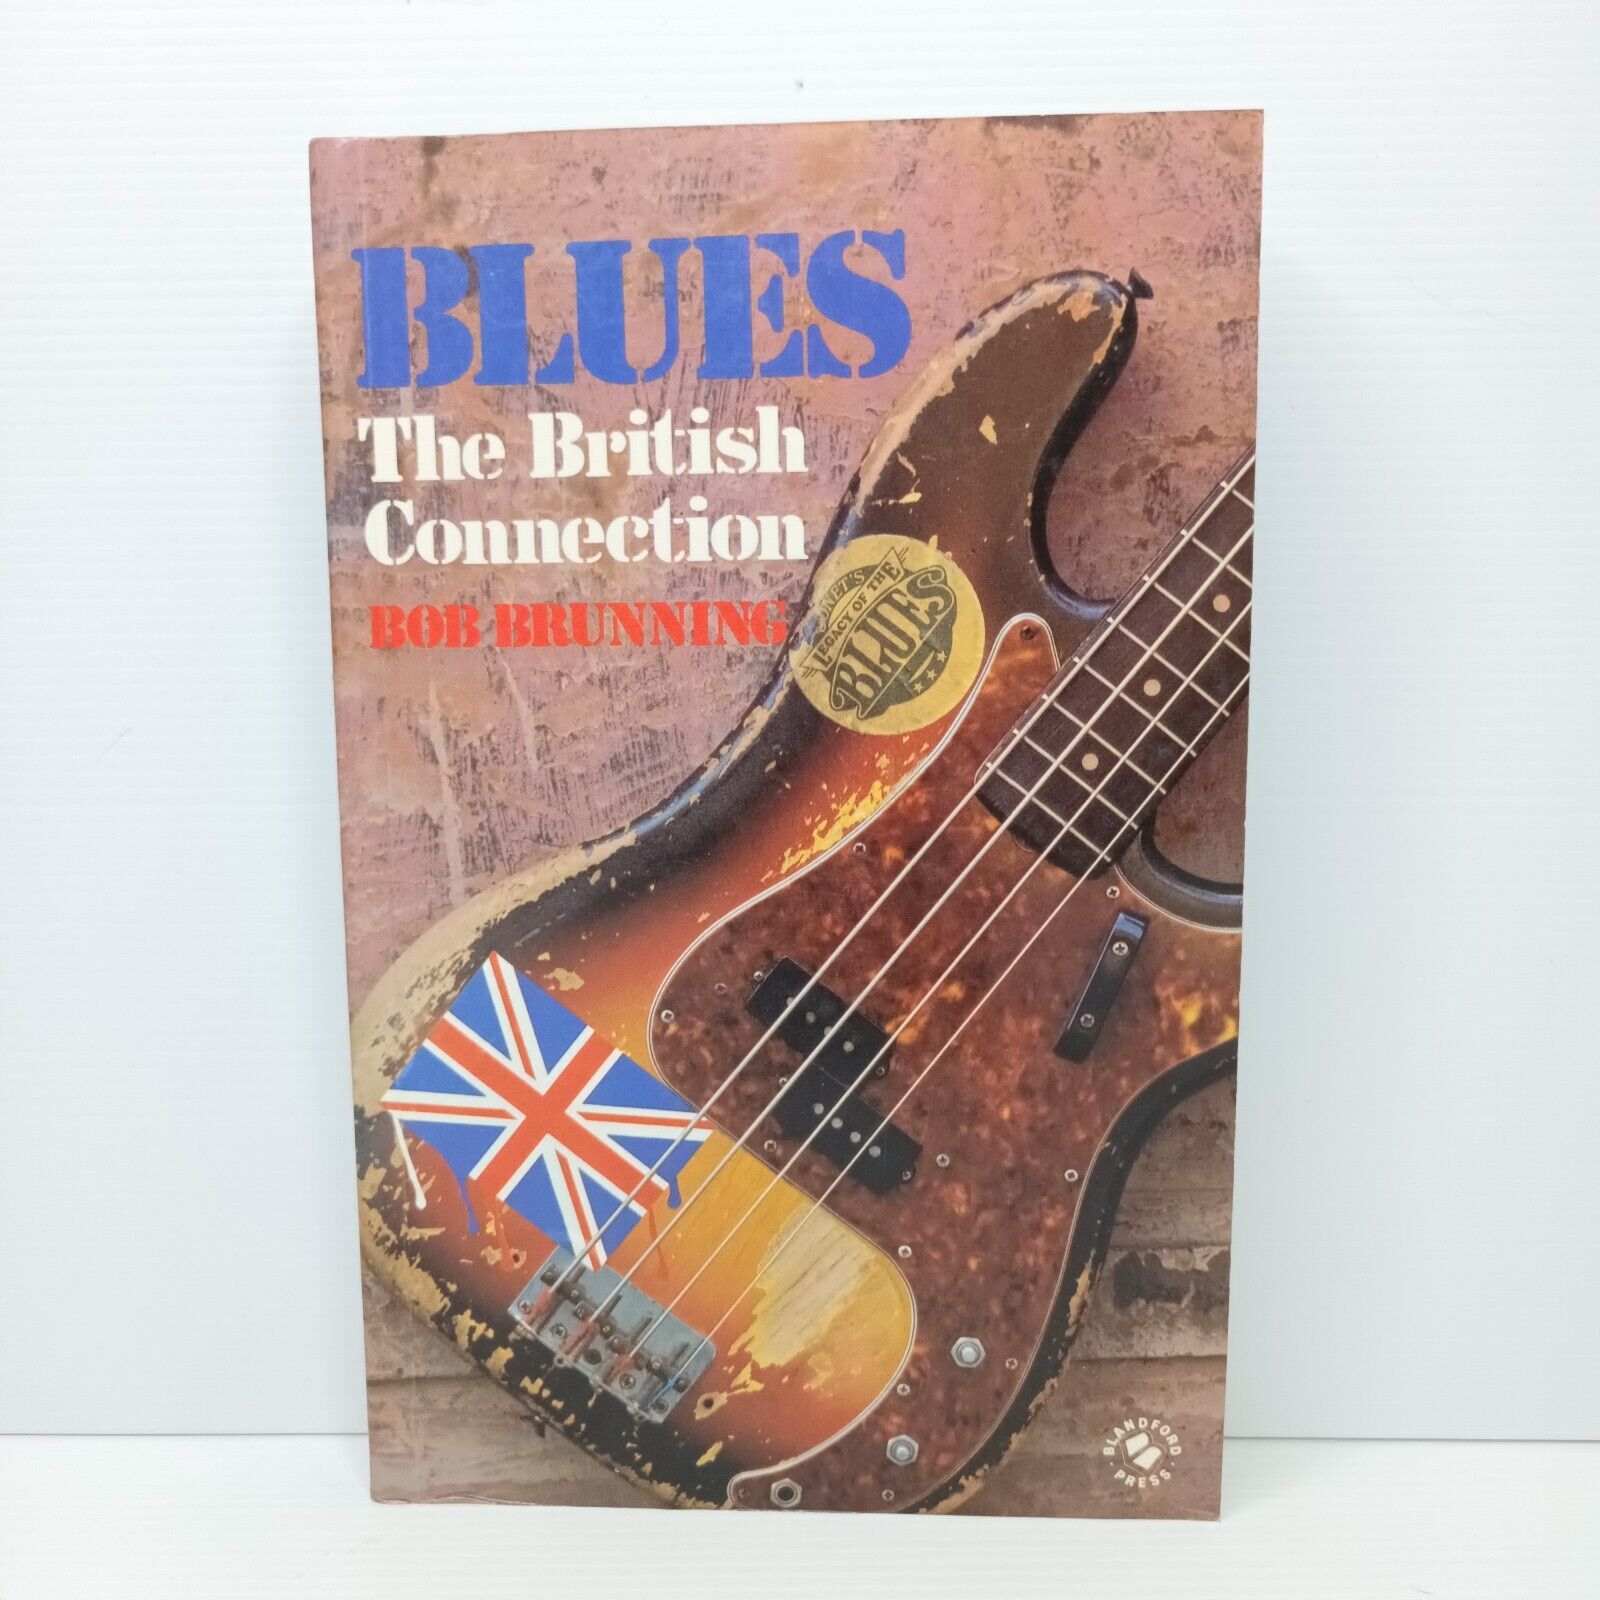 Blues: The British Connection by Bob Brunning